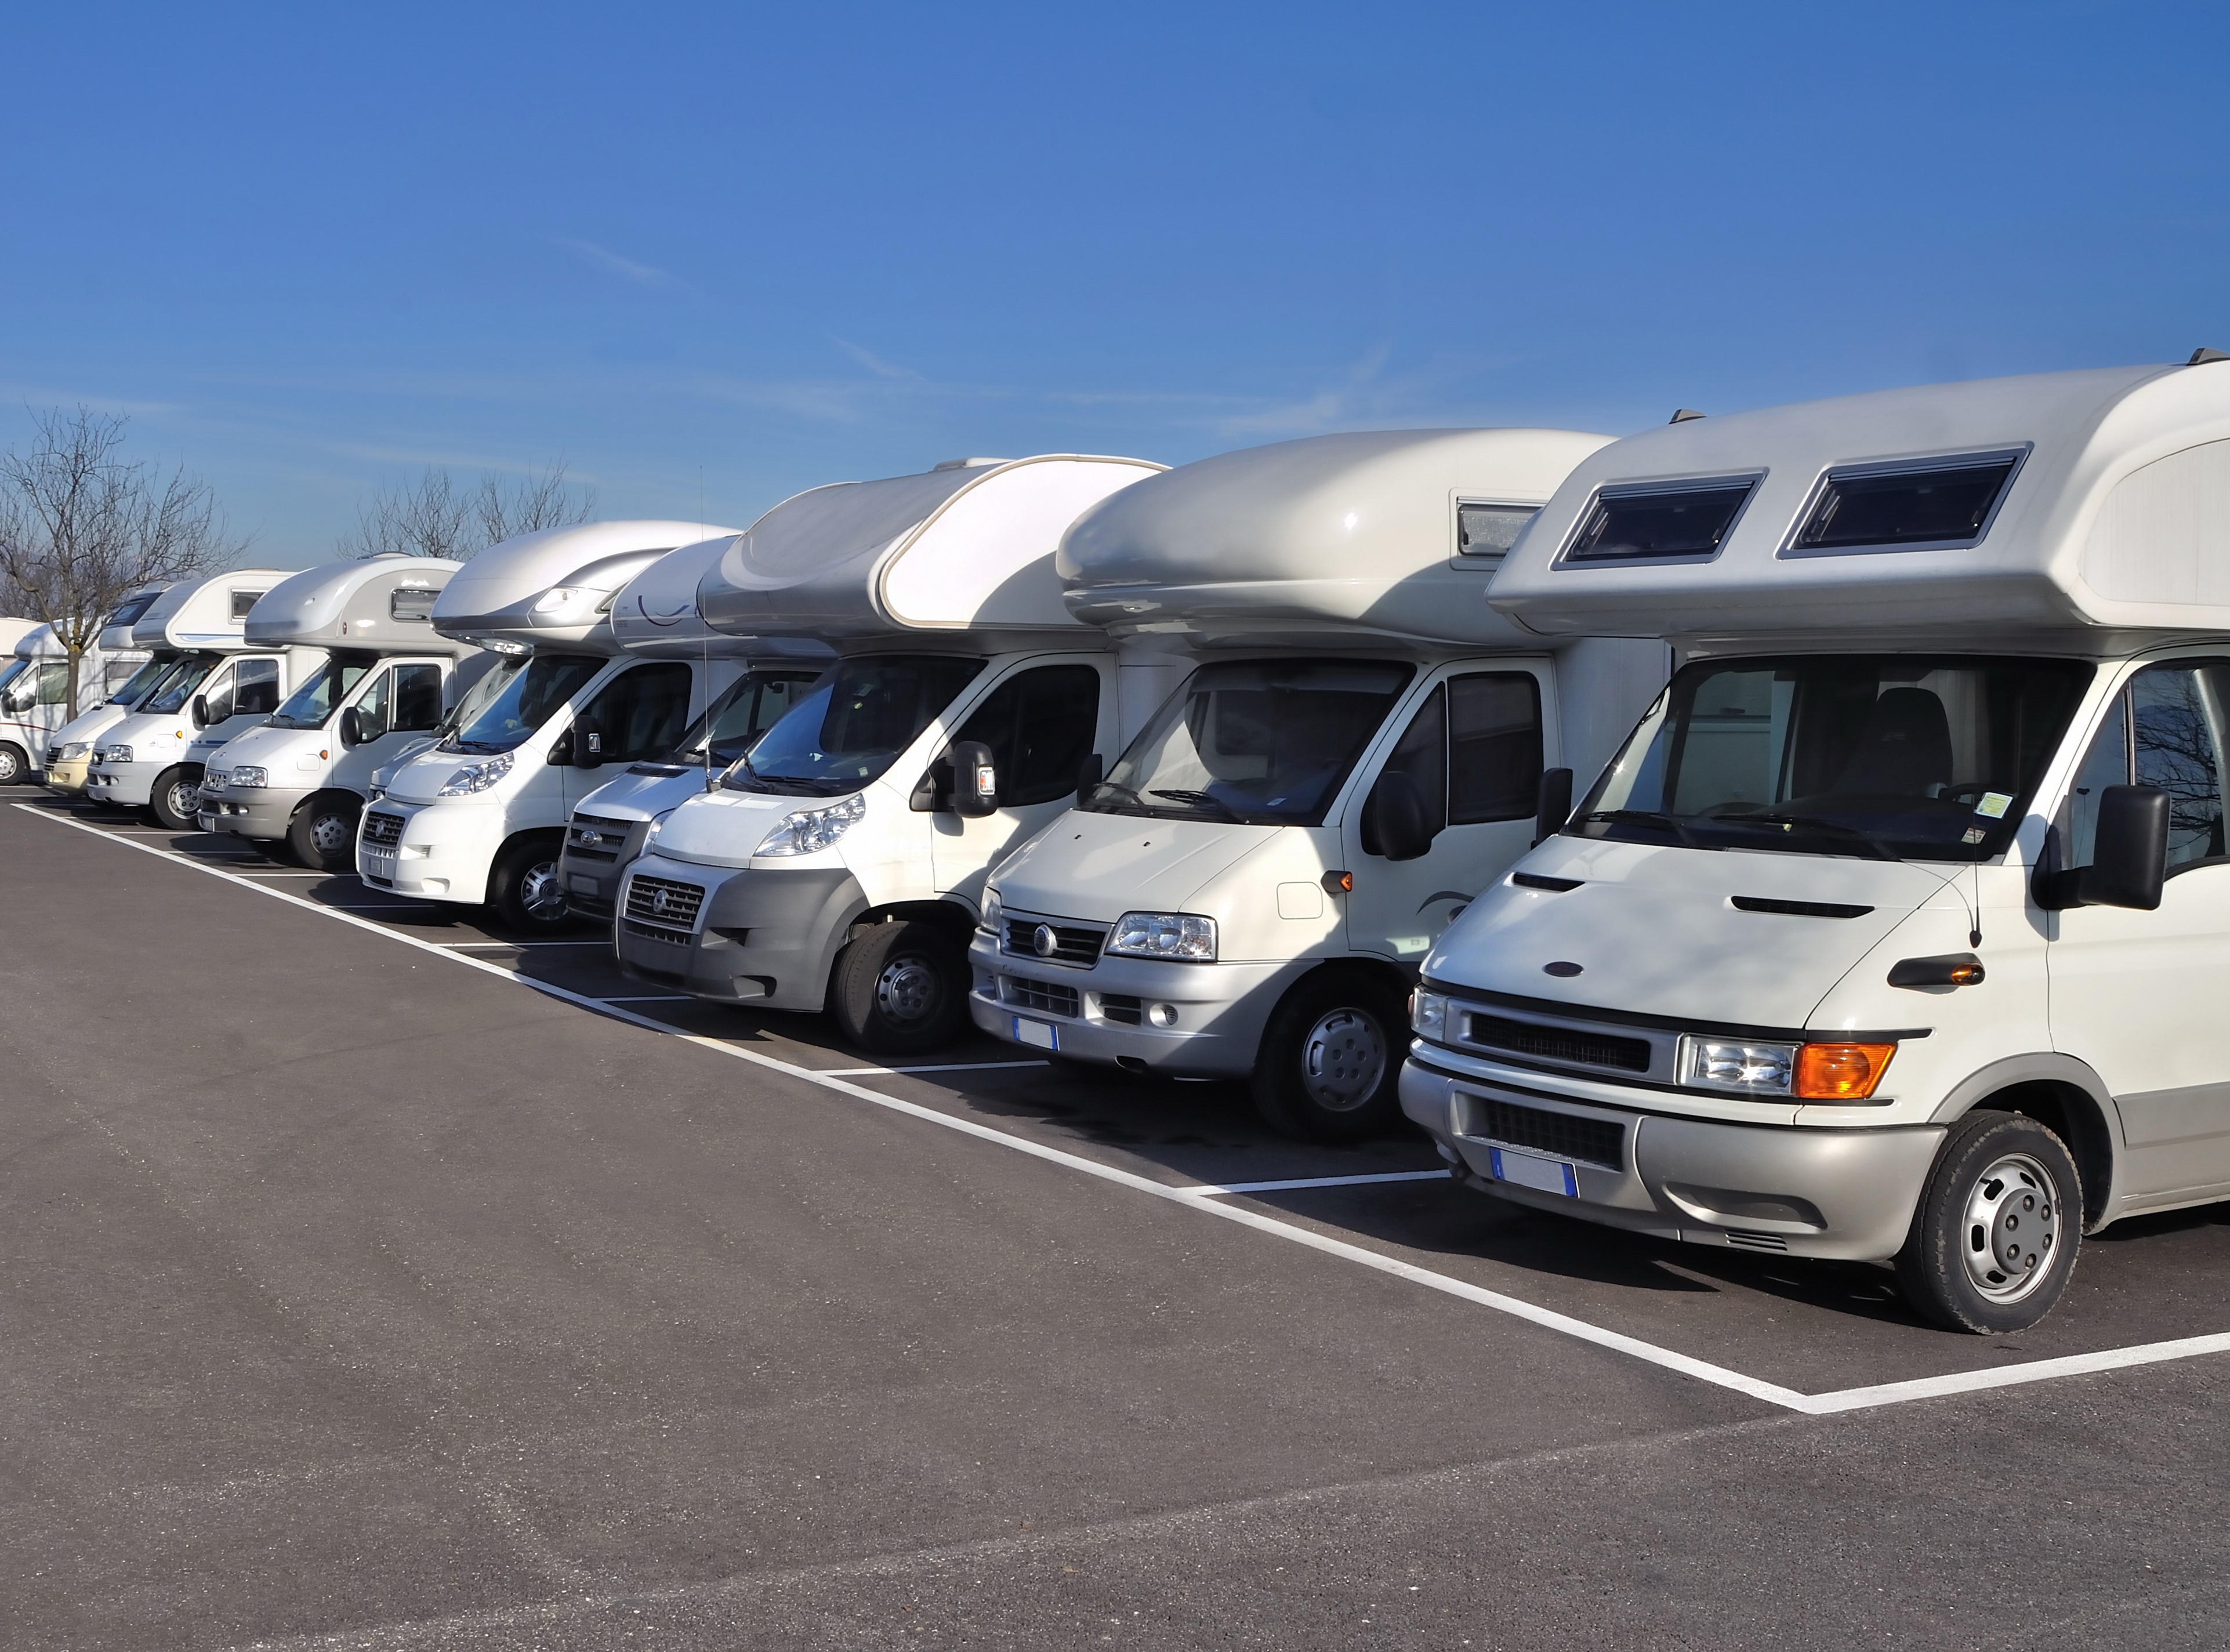 Stouchsburg Storage - Outdoor RV and Vehicle Parking in Womelsdorf, PA